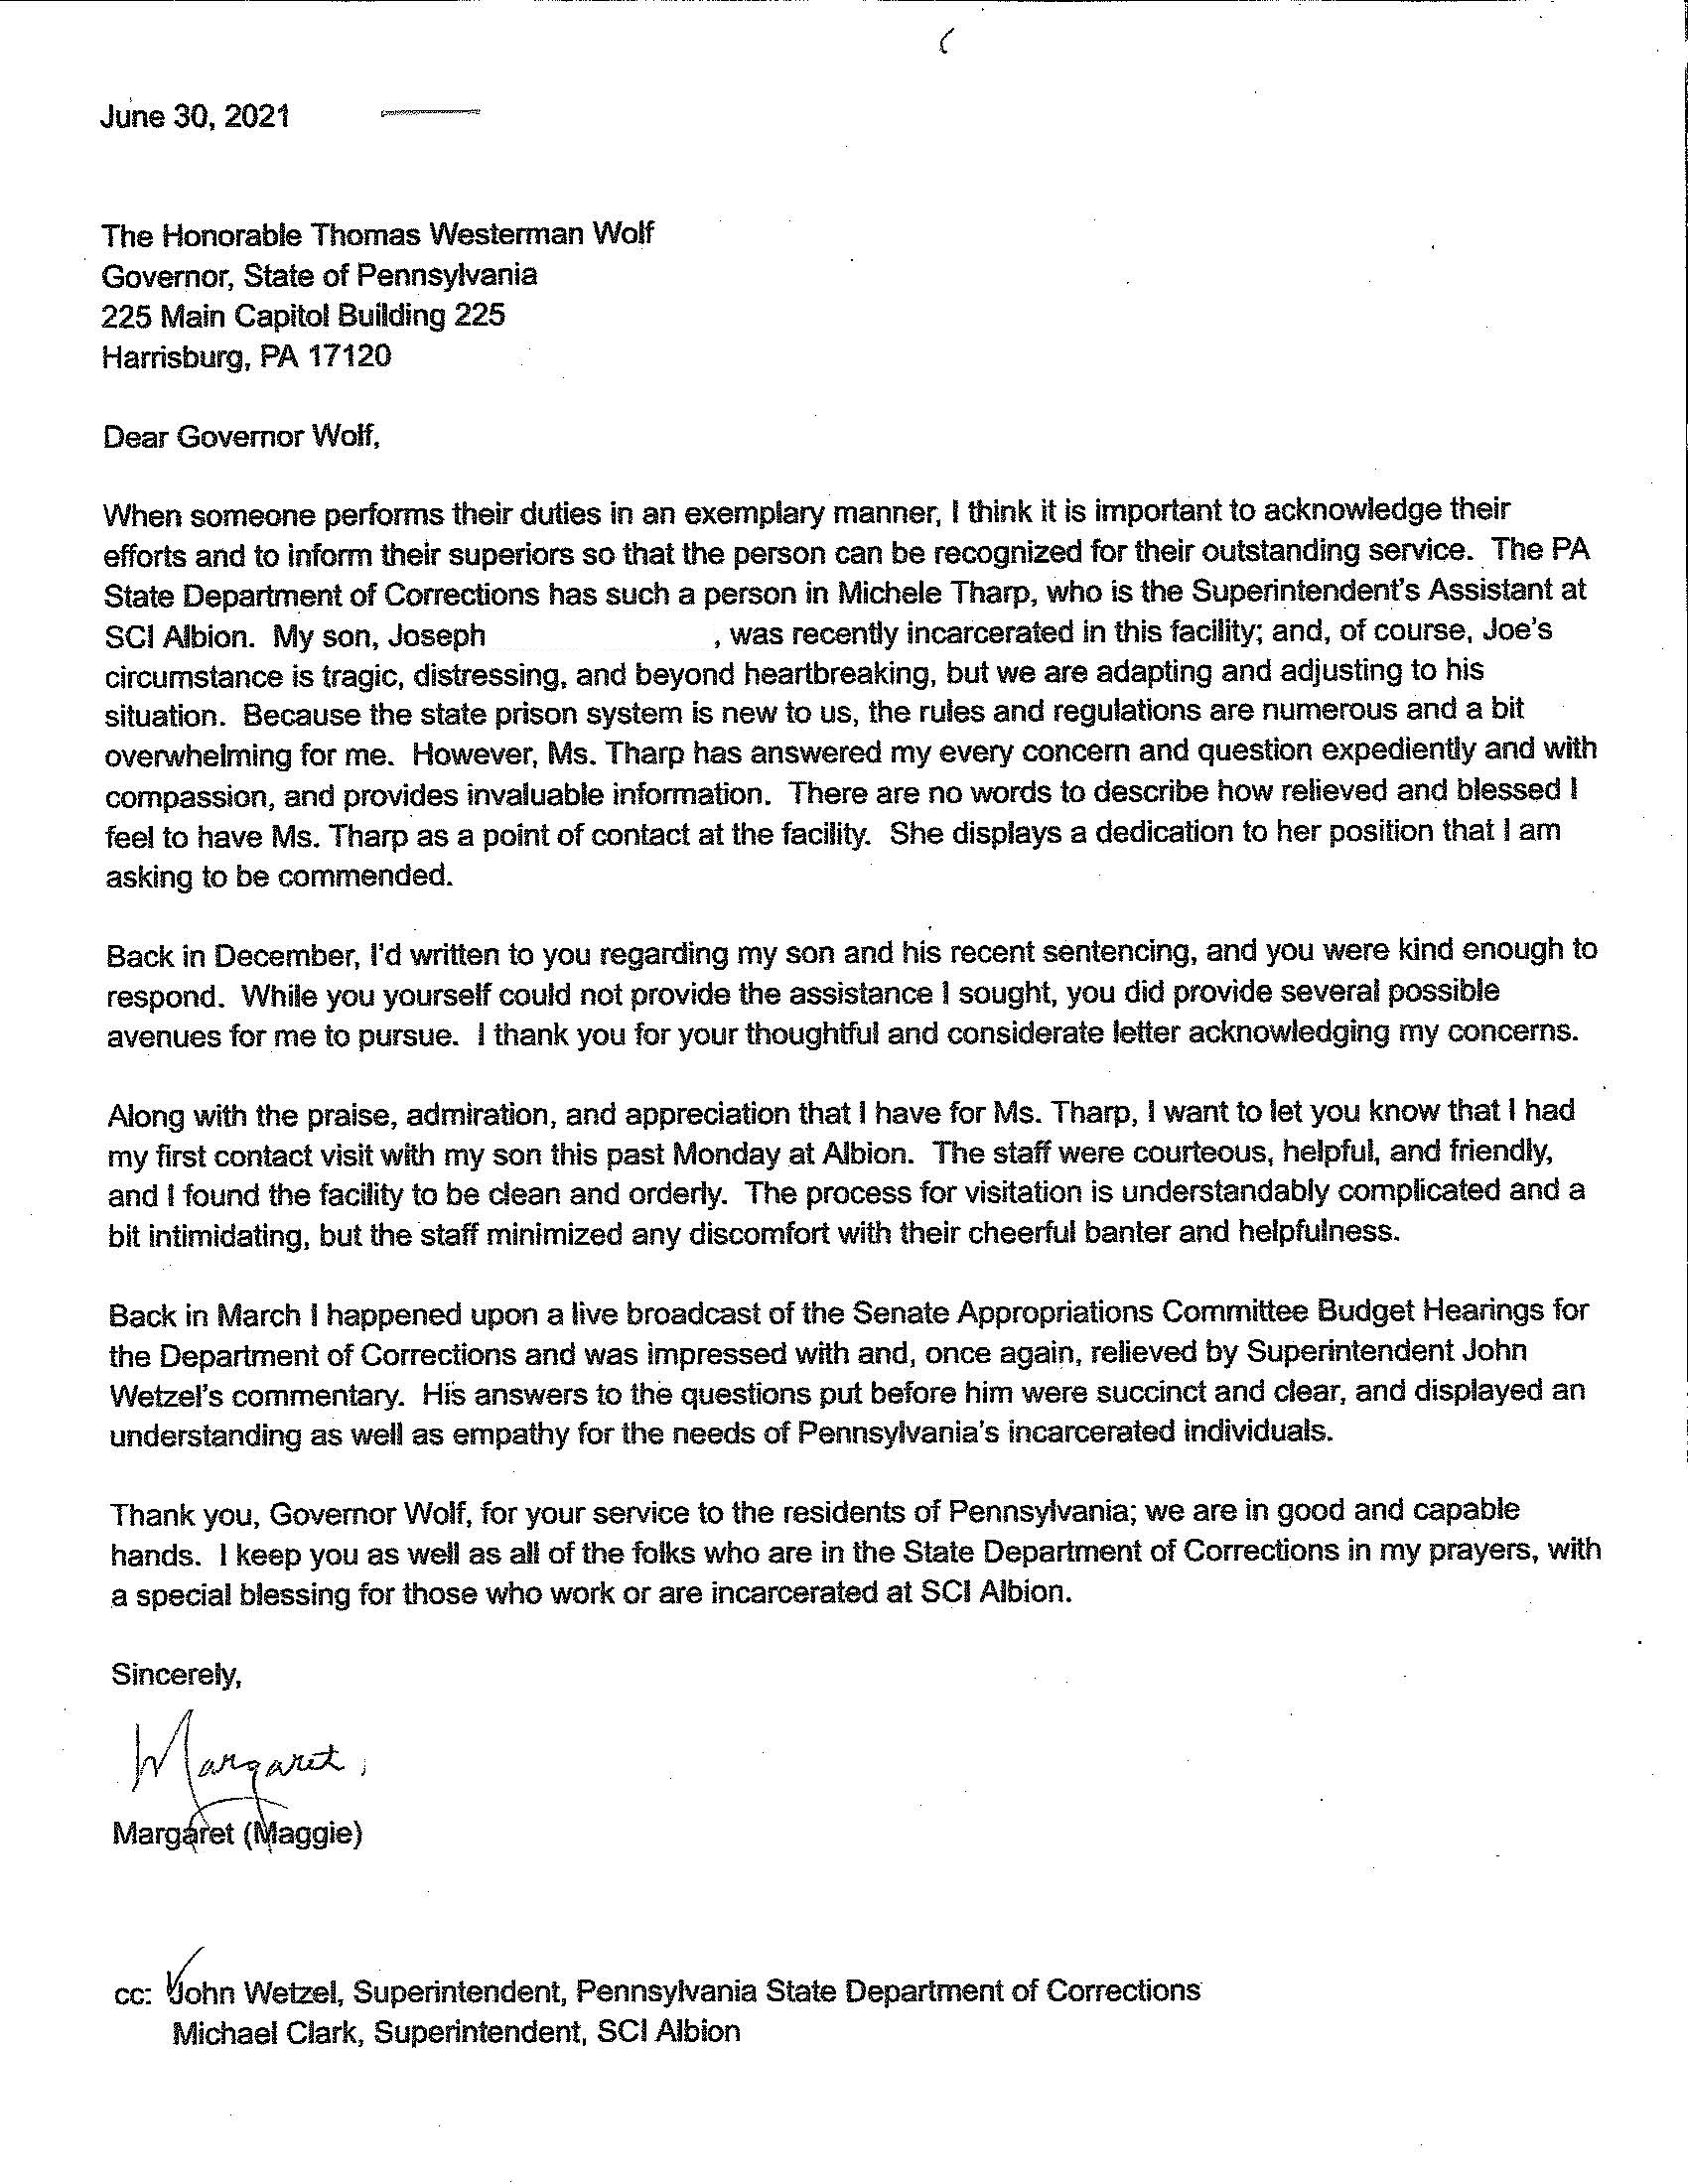 A letter written to Gov. Tom Wolf by an inmate's mother